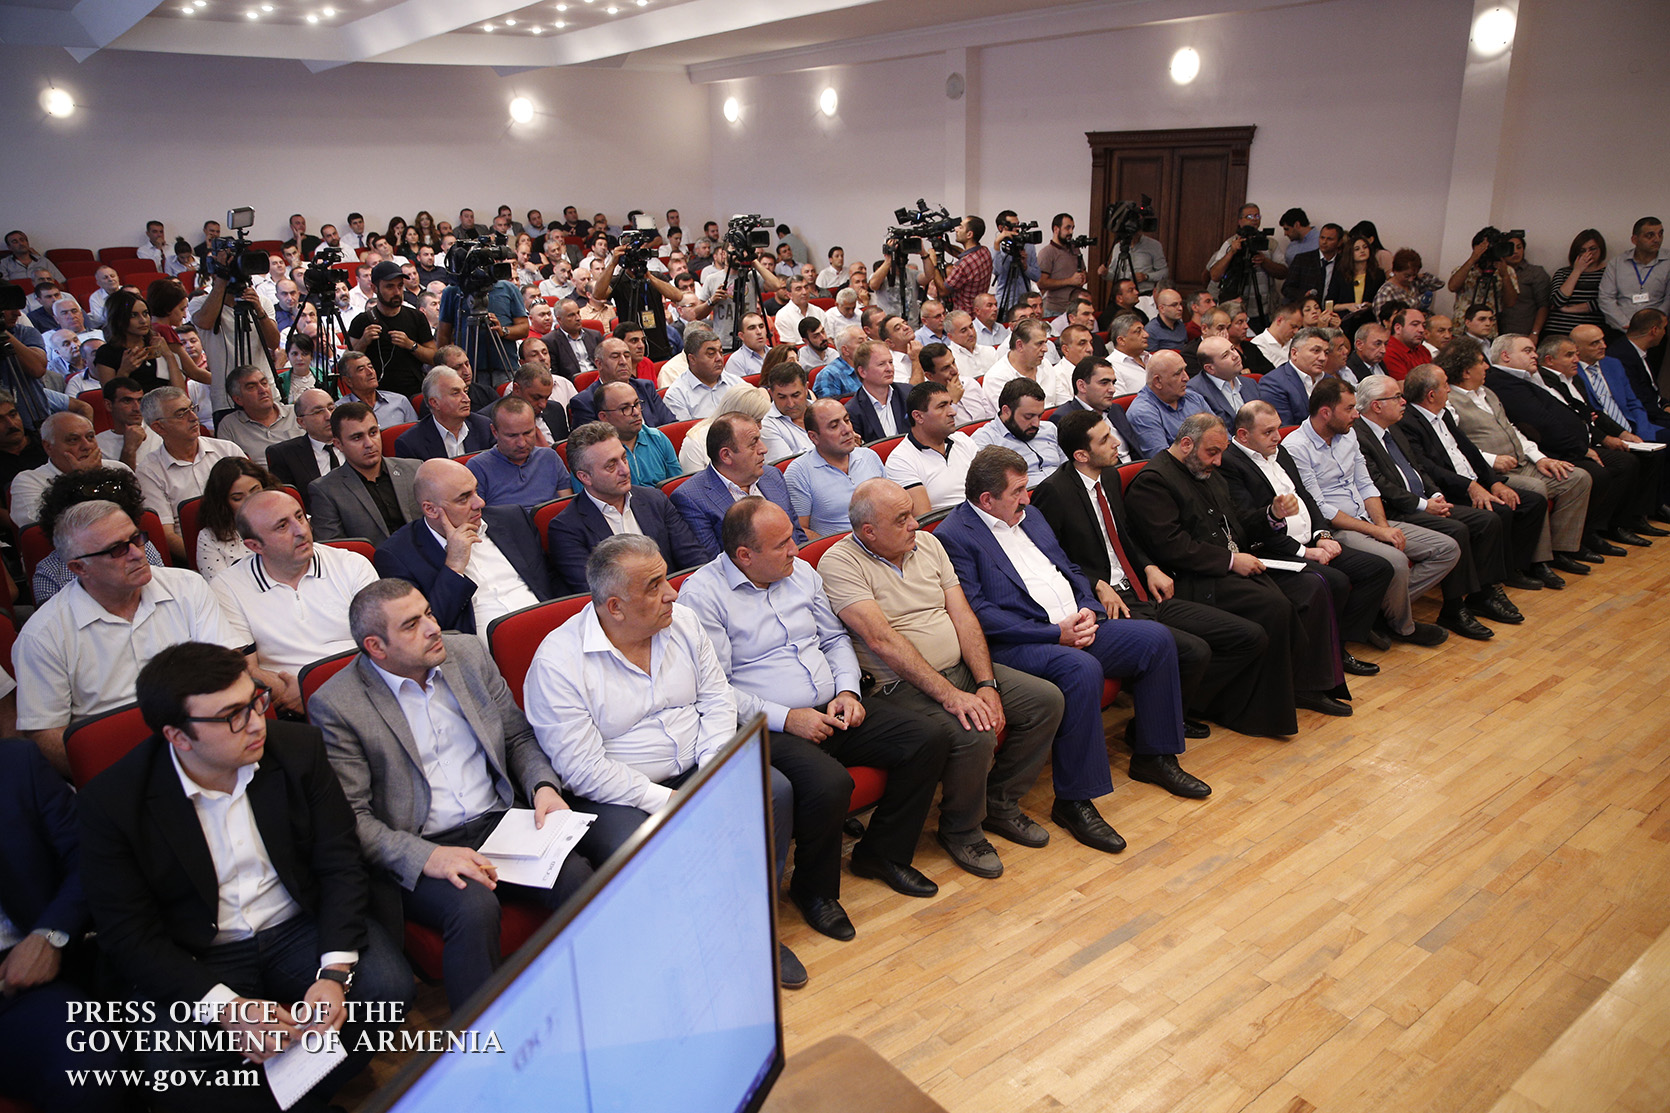 ‘Economic development may take place in Armenia if the government and business community establish real partnership’ – PM Attends ‘My Step for Tavush’ Investment Forum